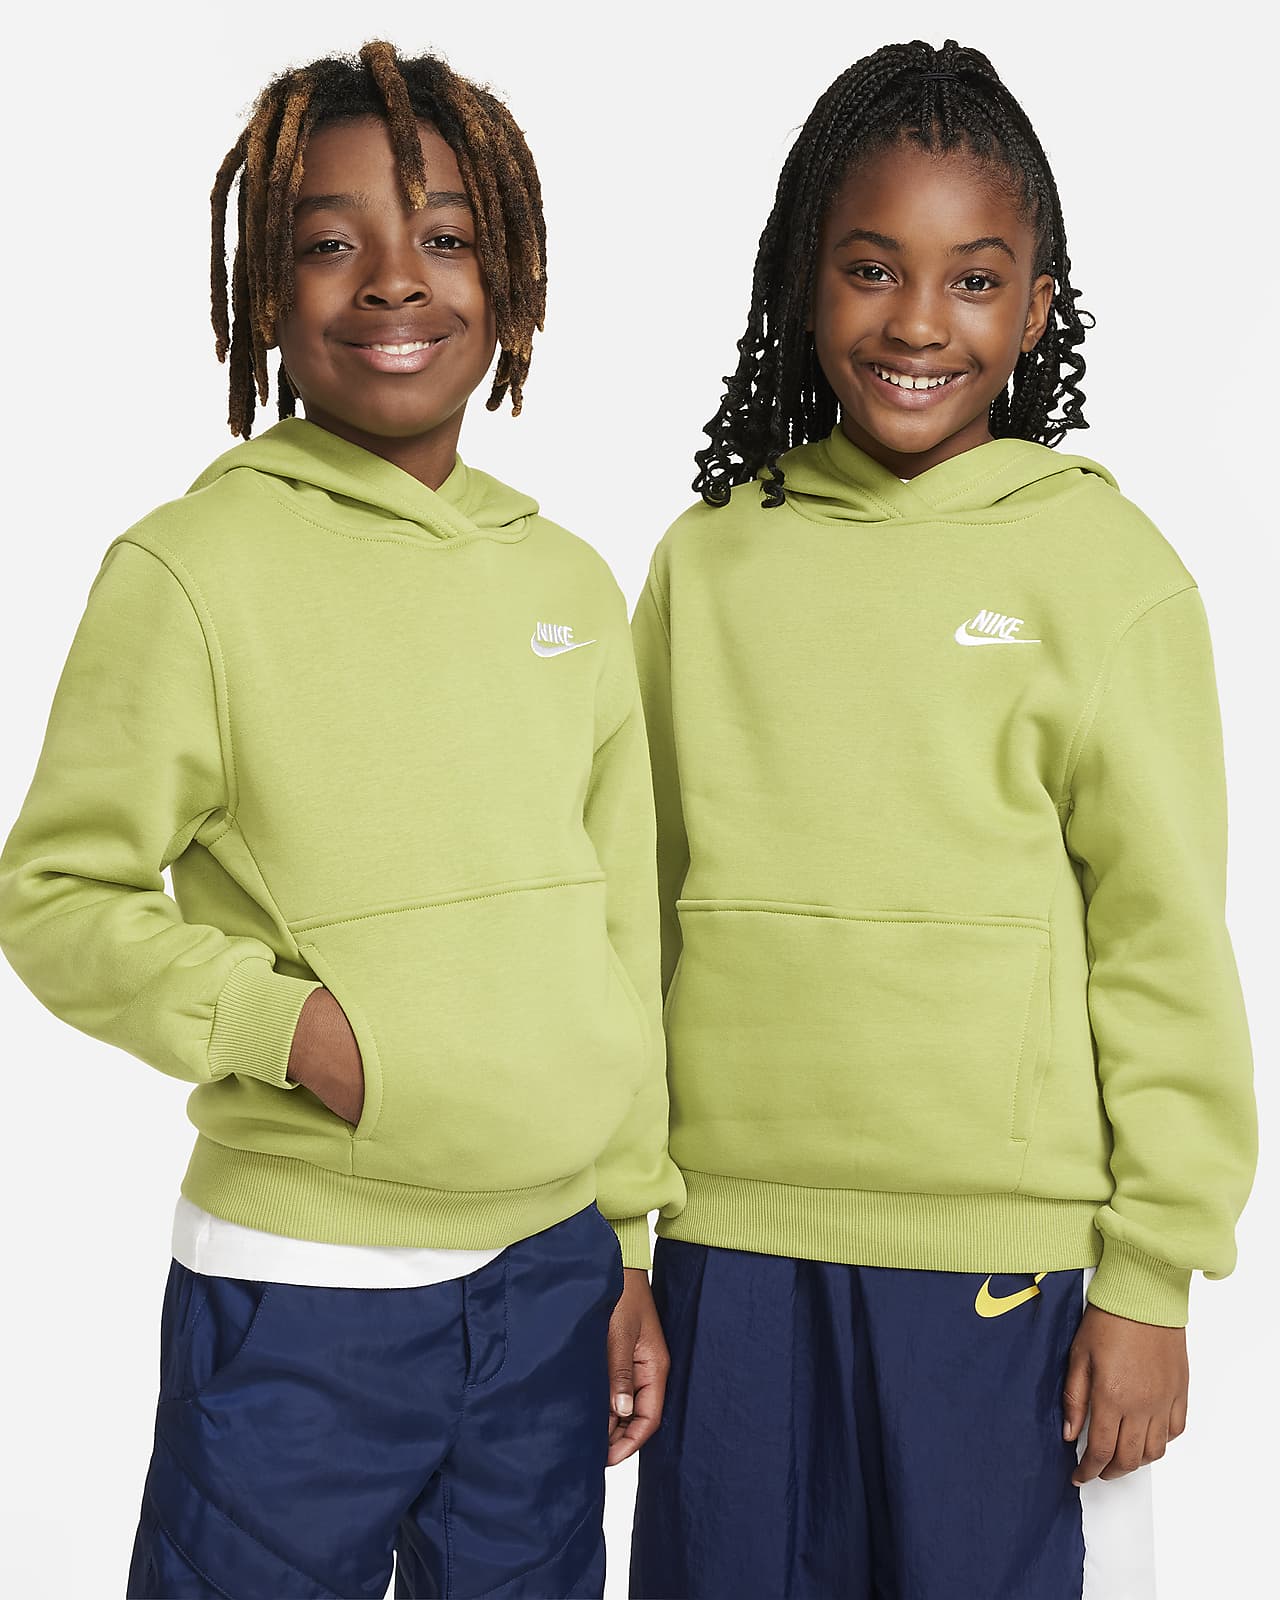 https://static.nike.com/a/images/t_PDP_1280_v1/f_auto,q_auto:eco/39334fb4-64dc-4440-98a0-a3e5a363cdee/sportswear-club-fleece-older-pullover-hoodie-PwGfcT.png